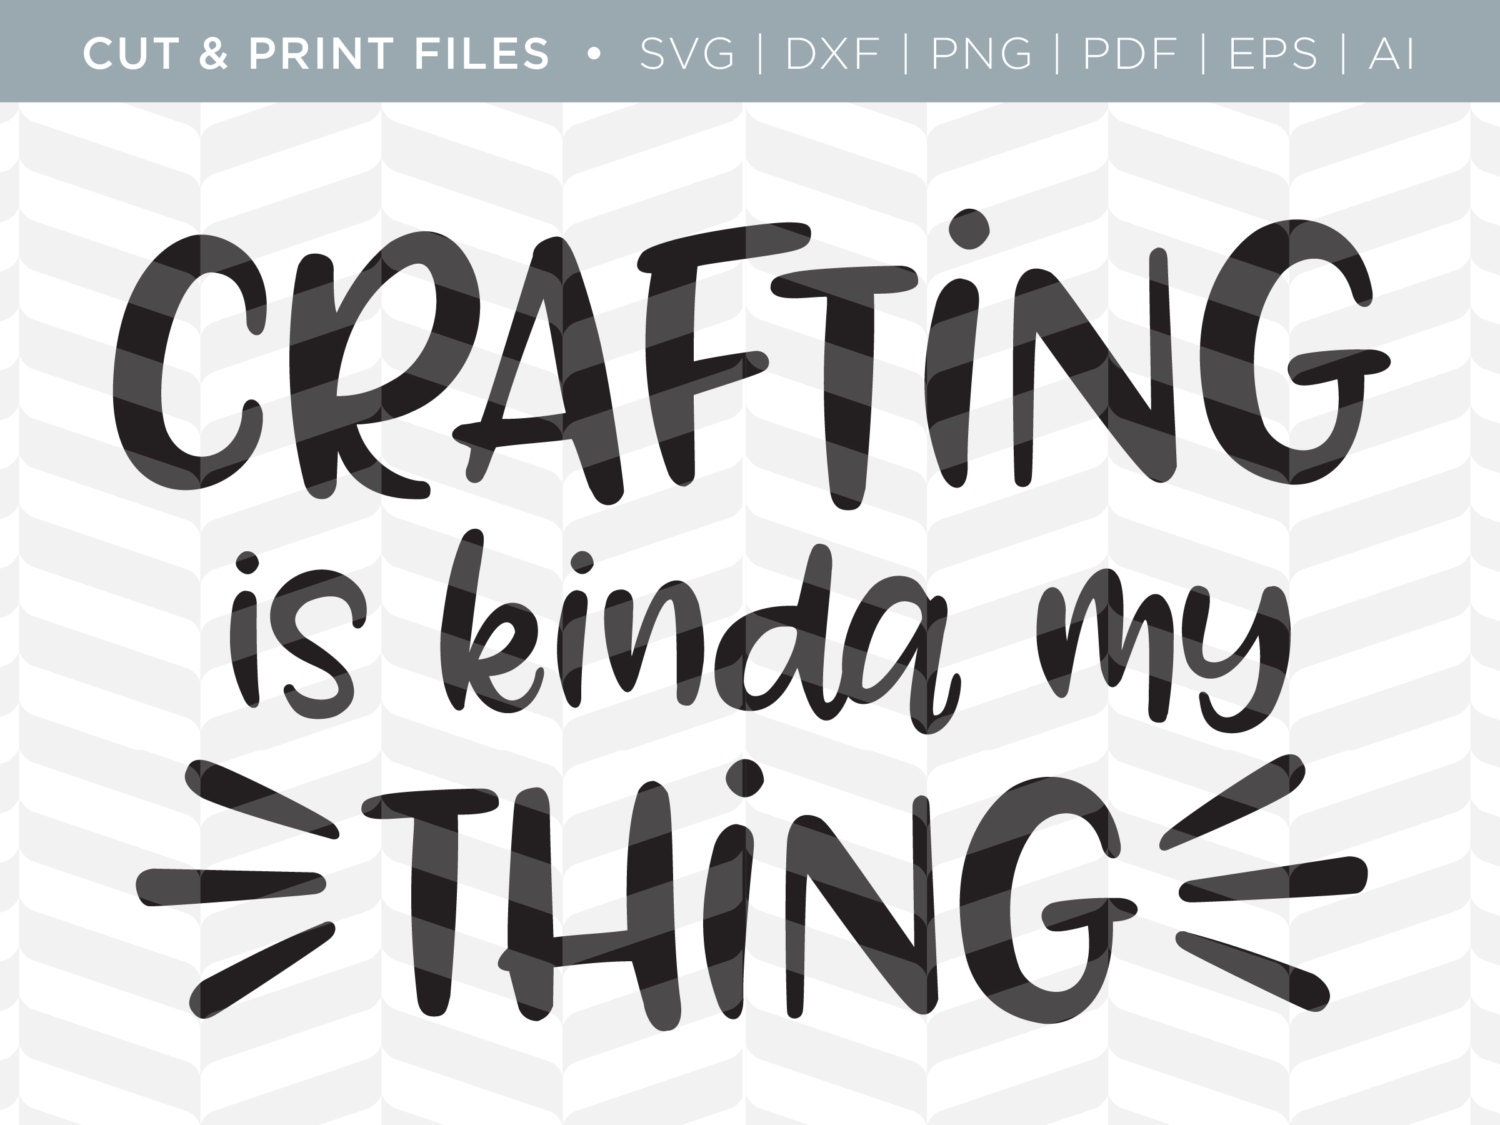 Download SVG Cut / Print Files - Crafting | Crafting Quote | Cricut ...